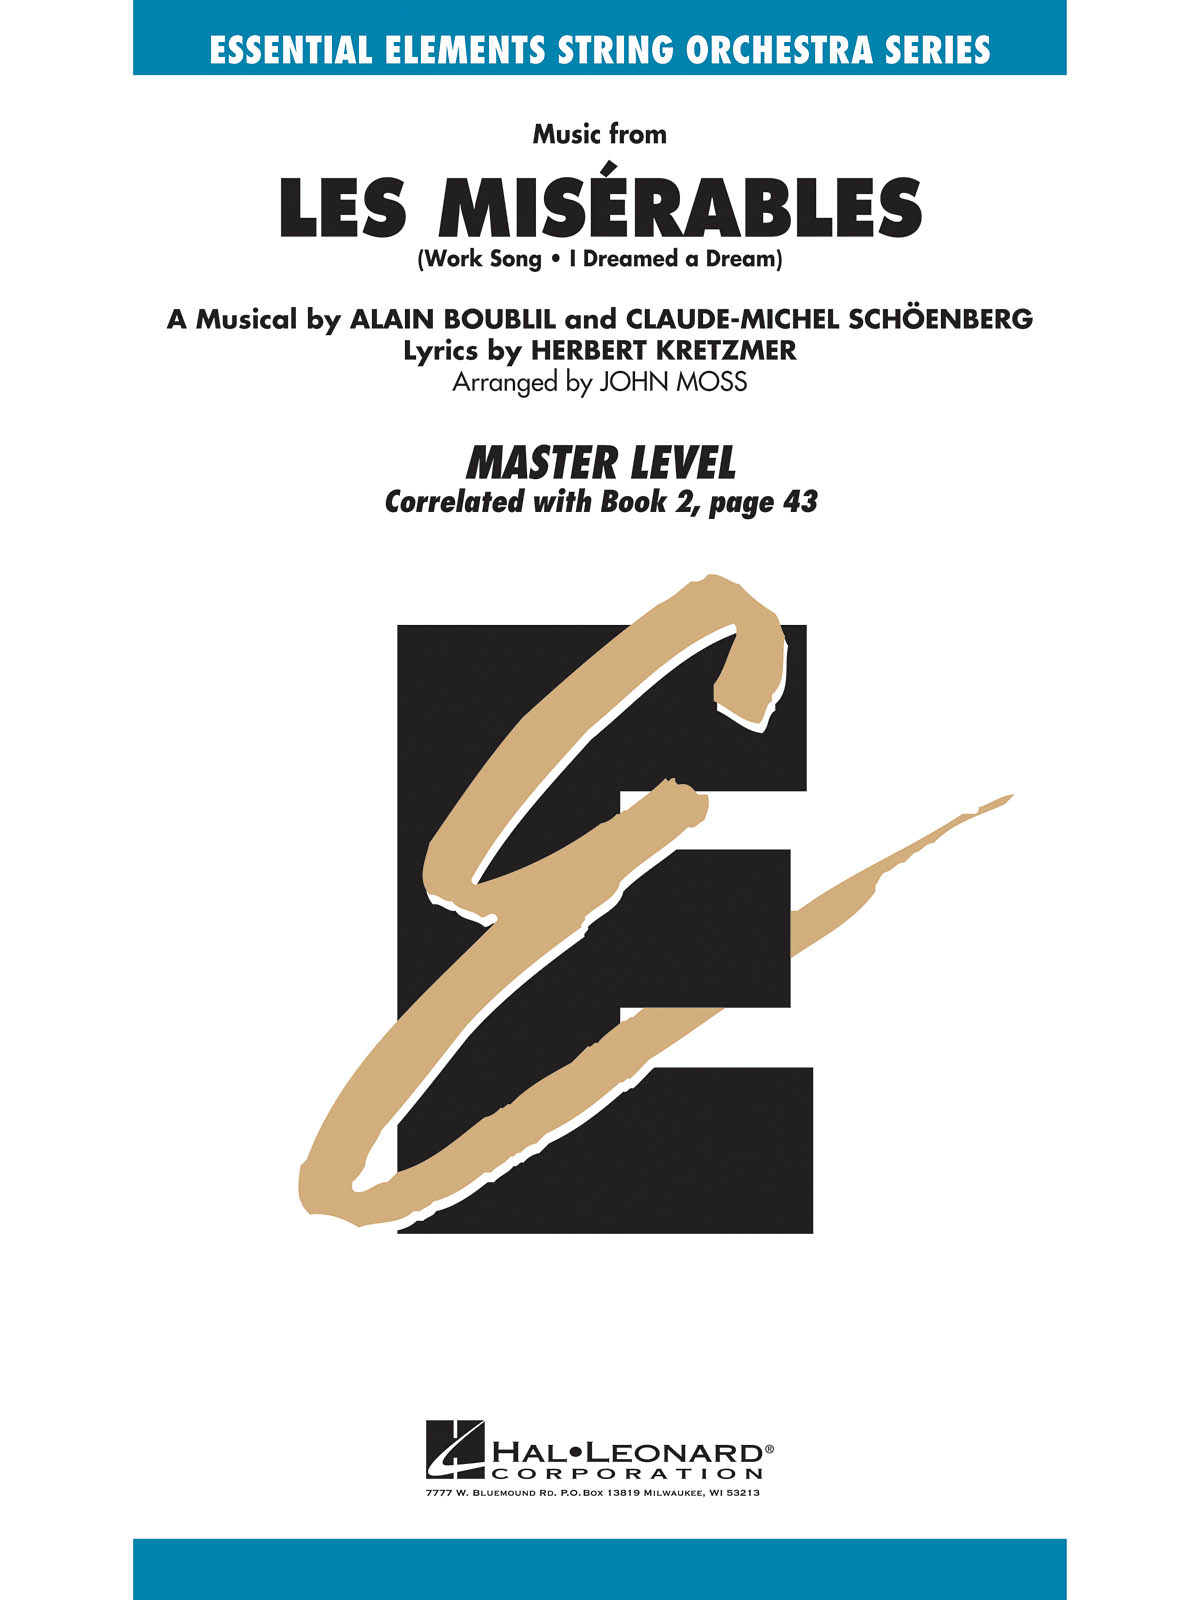 Alain Boublil Claude-Michel Schnberg: Music from Les Mis?rables: String